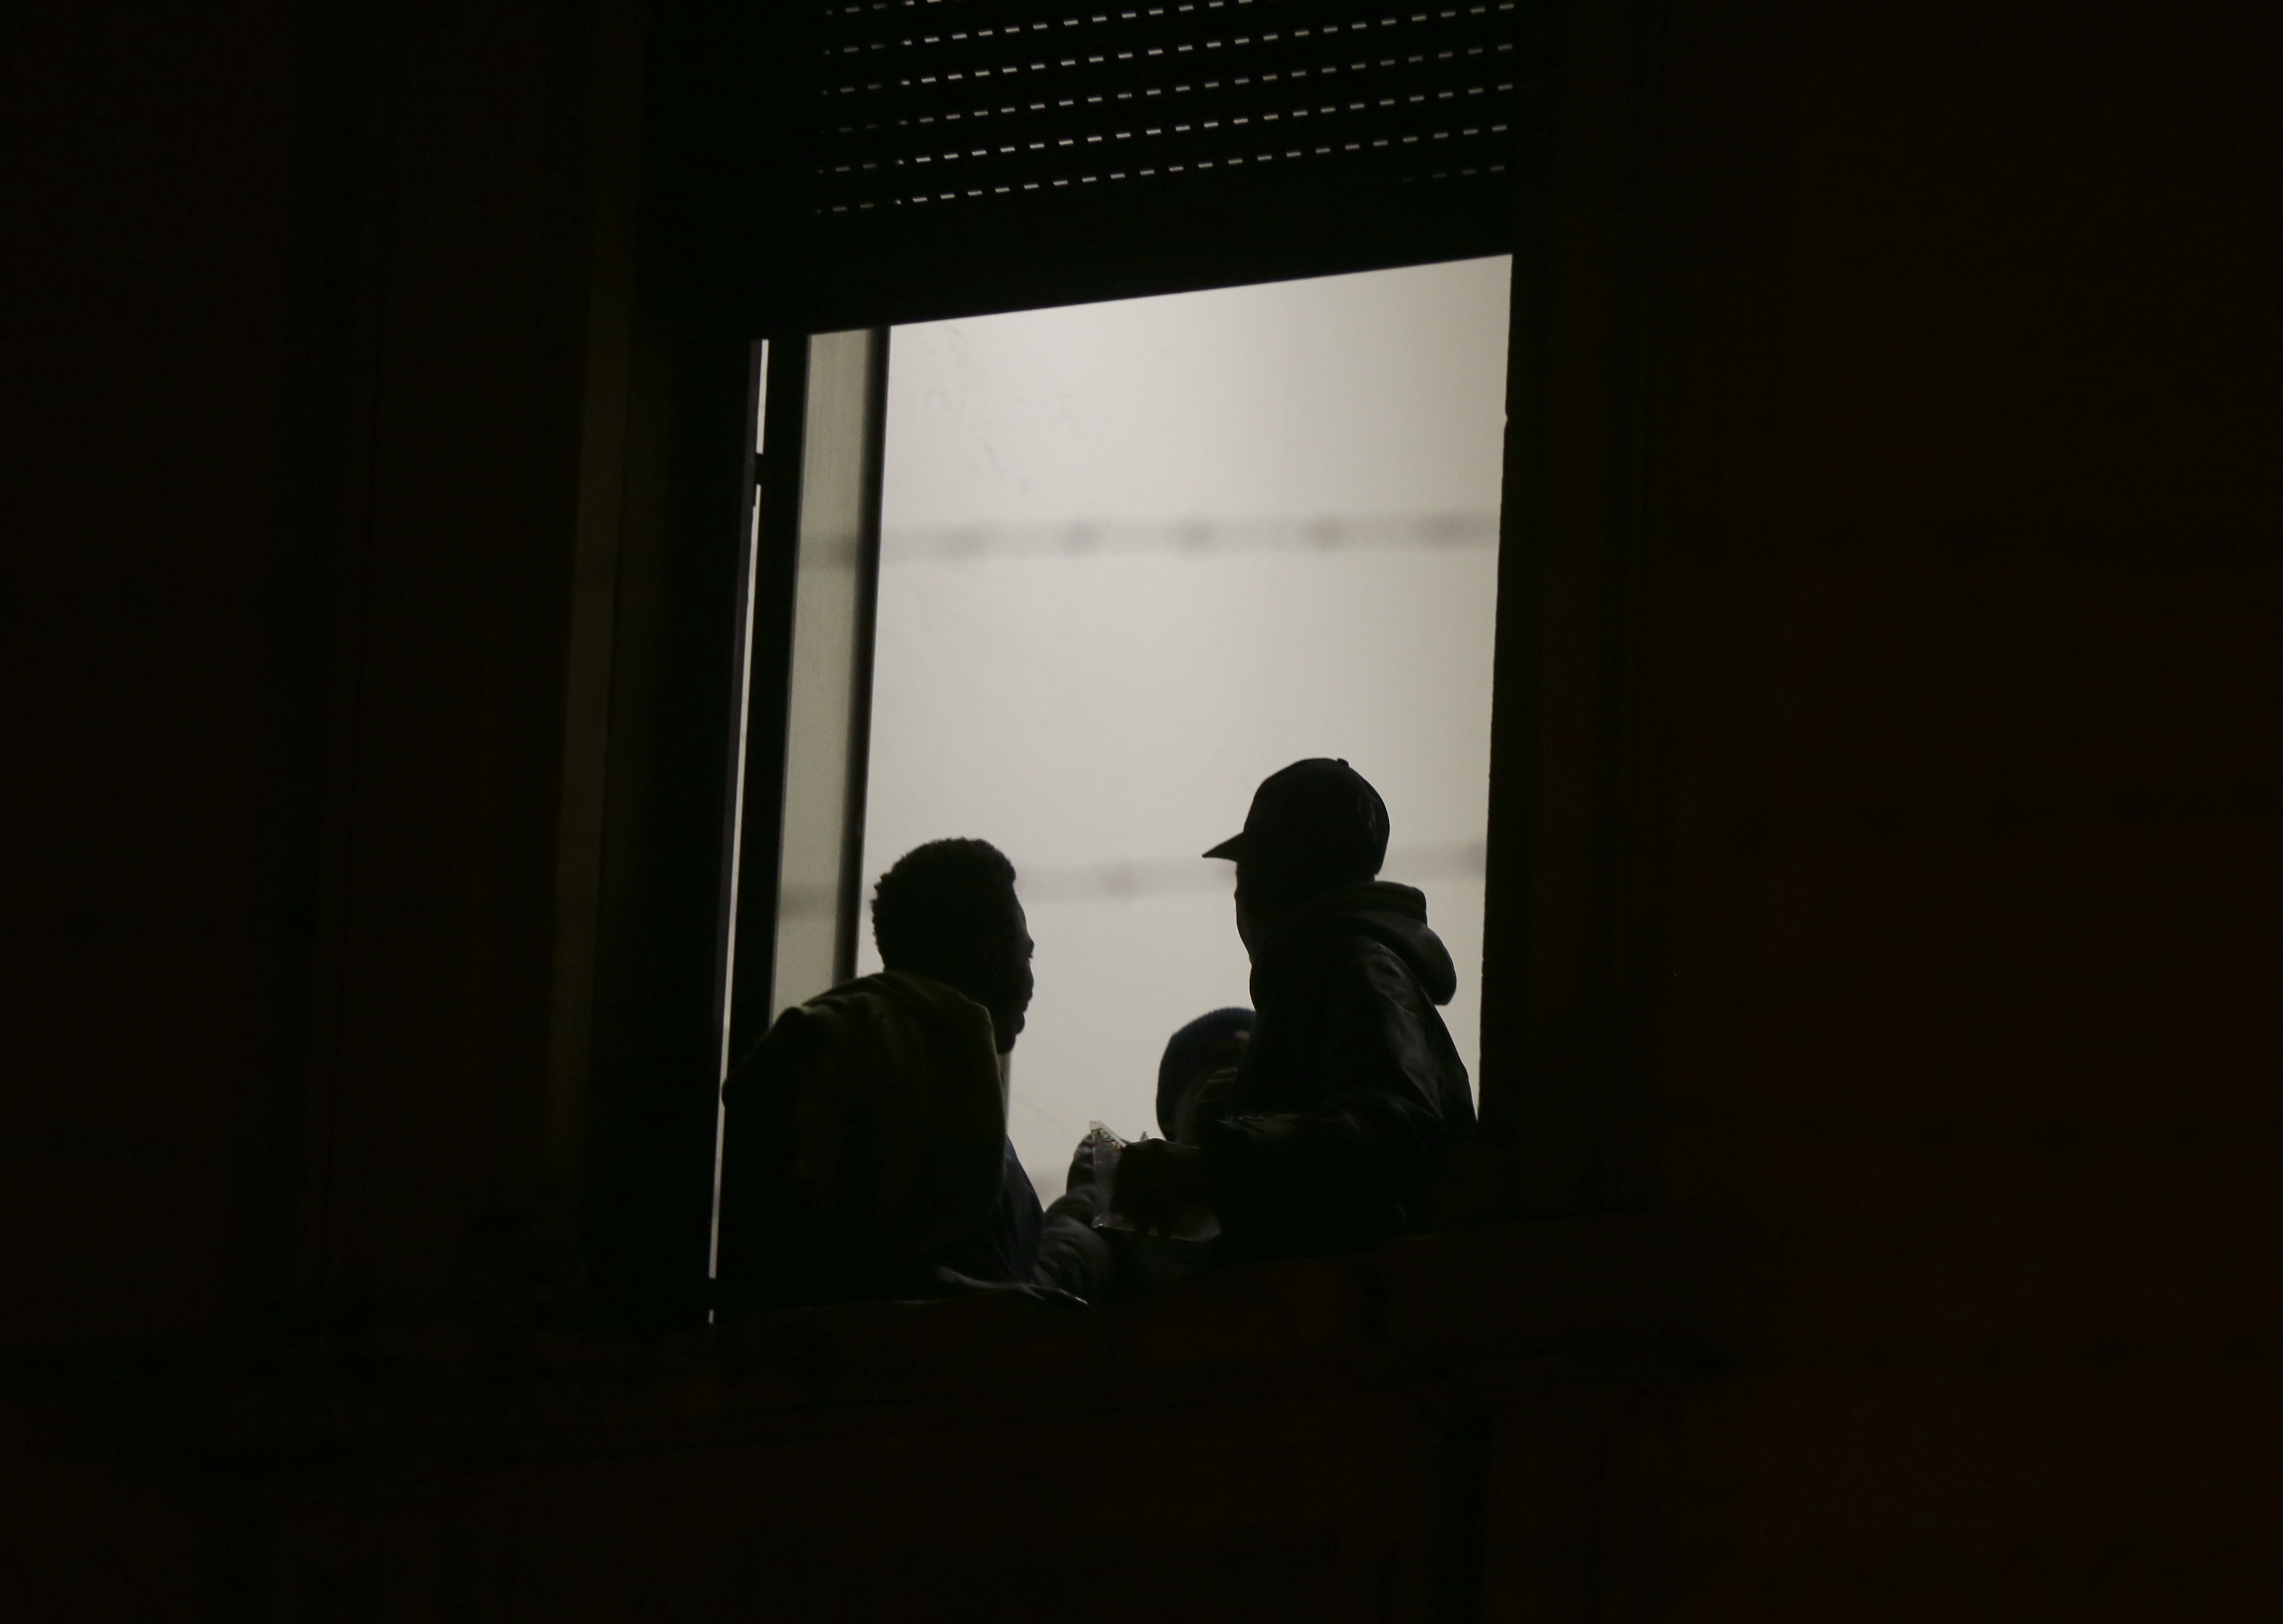 Migrants stand behind a window at the former Montello barrack in Milan, Italy, on Oct. 31, 2016. (Luca Bruno—AP)